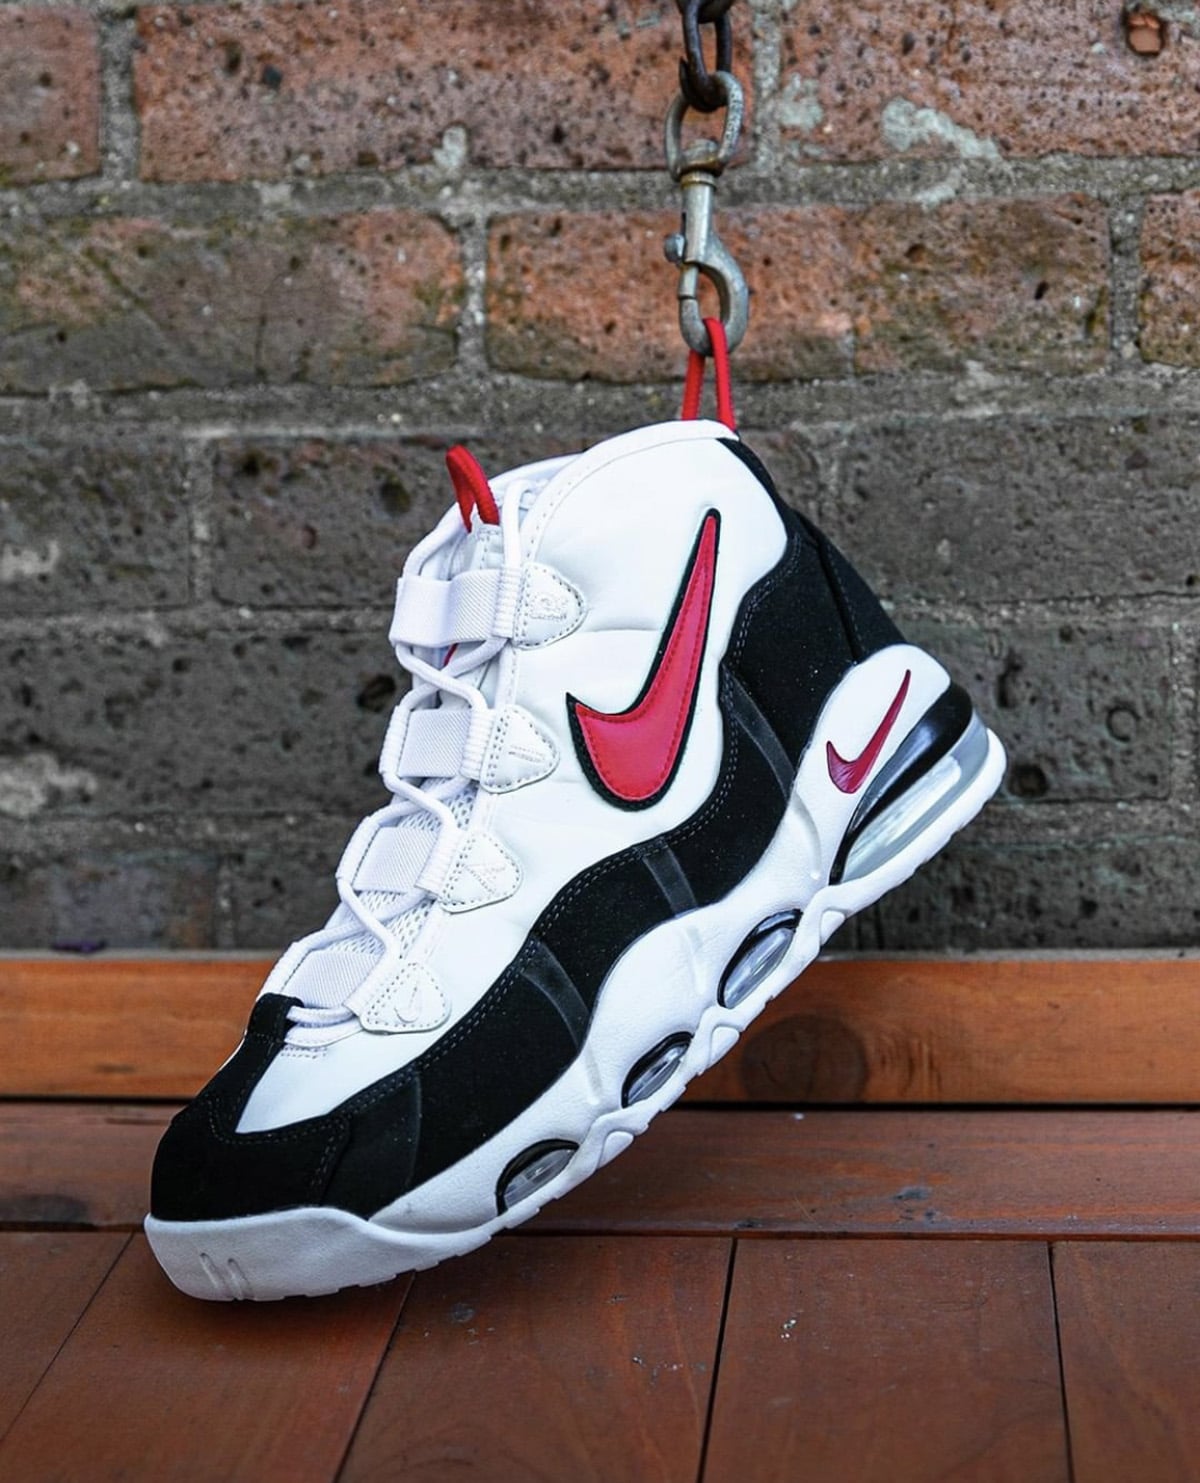 The Nike Air Max Uptempo 95 'Chicago 